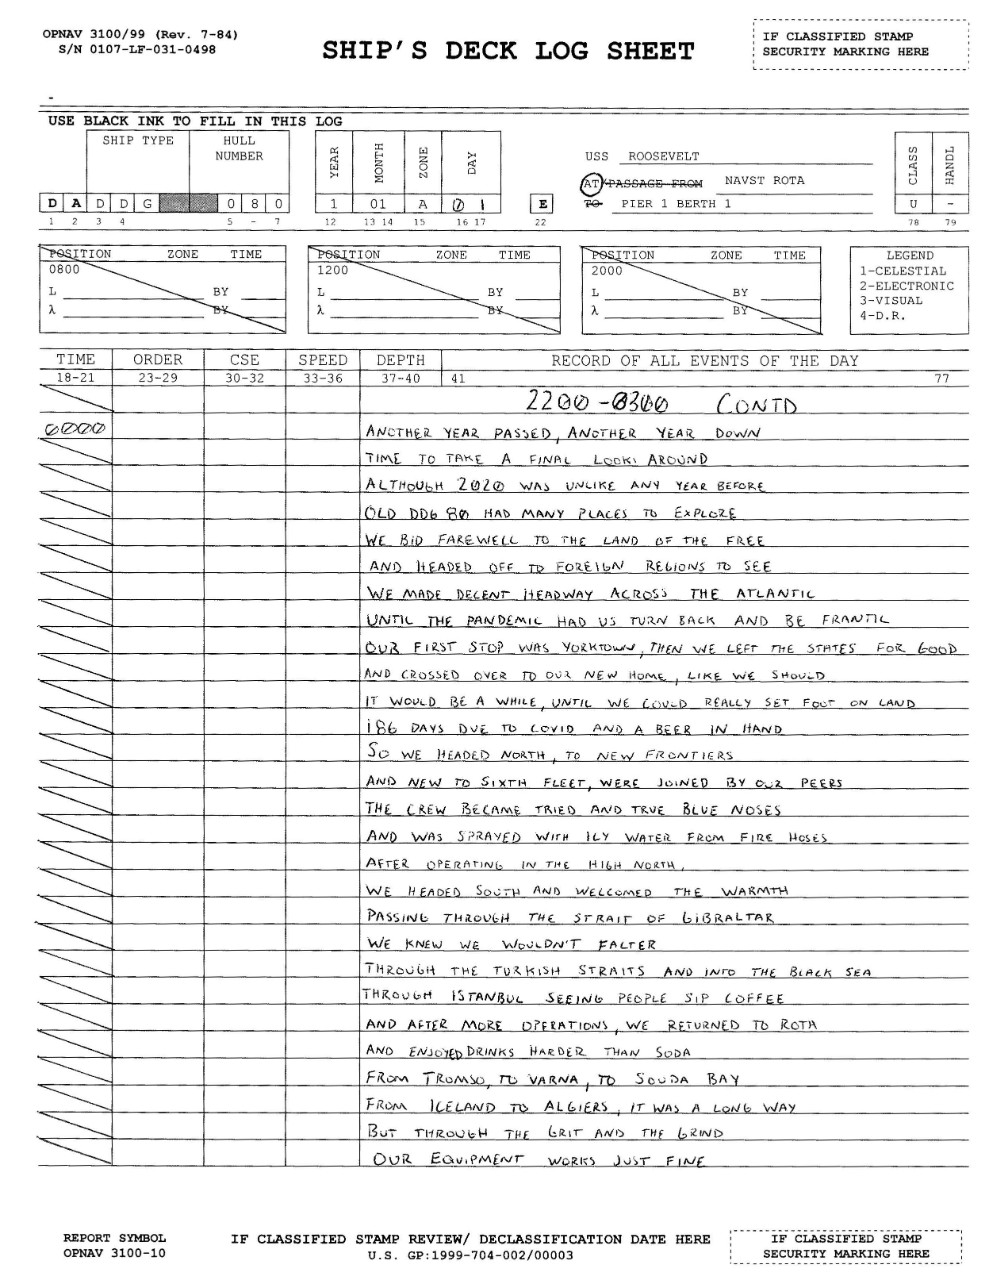 USS ROOSEVELT (DDG-80) 2021 New Years Deck Log Entry Page 1